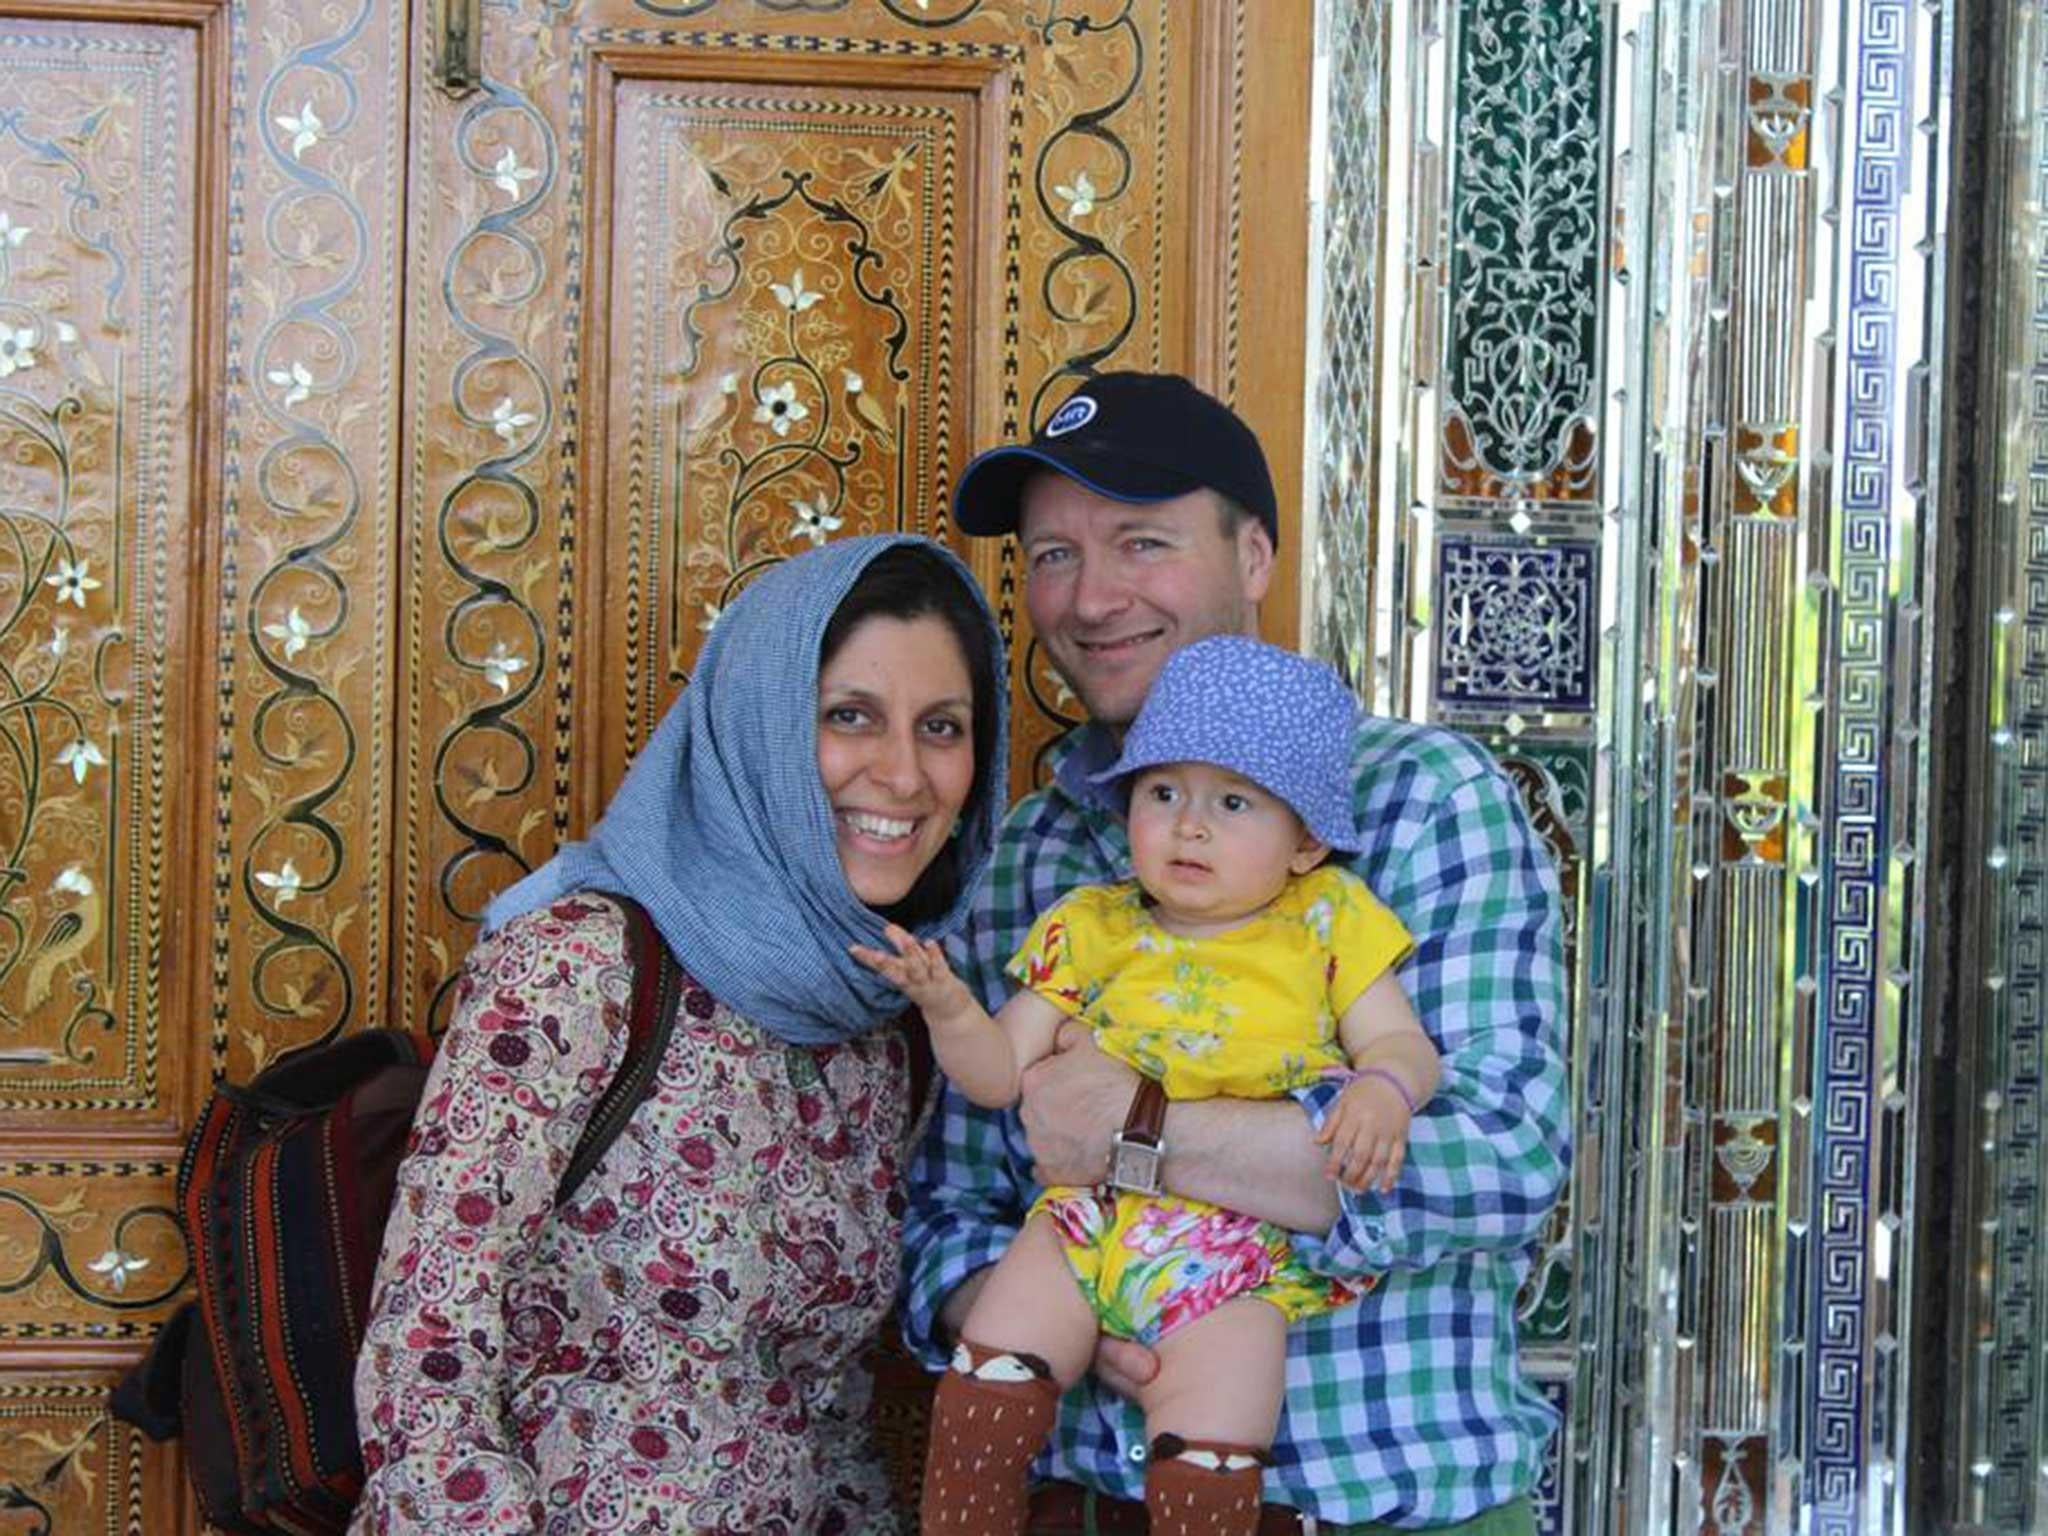 Mr Ratcliffe with his wife and daughter. Nazanin has travelled in the country without problems in the past